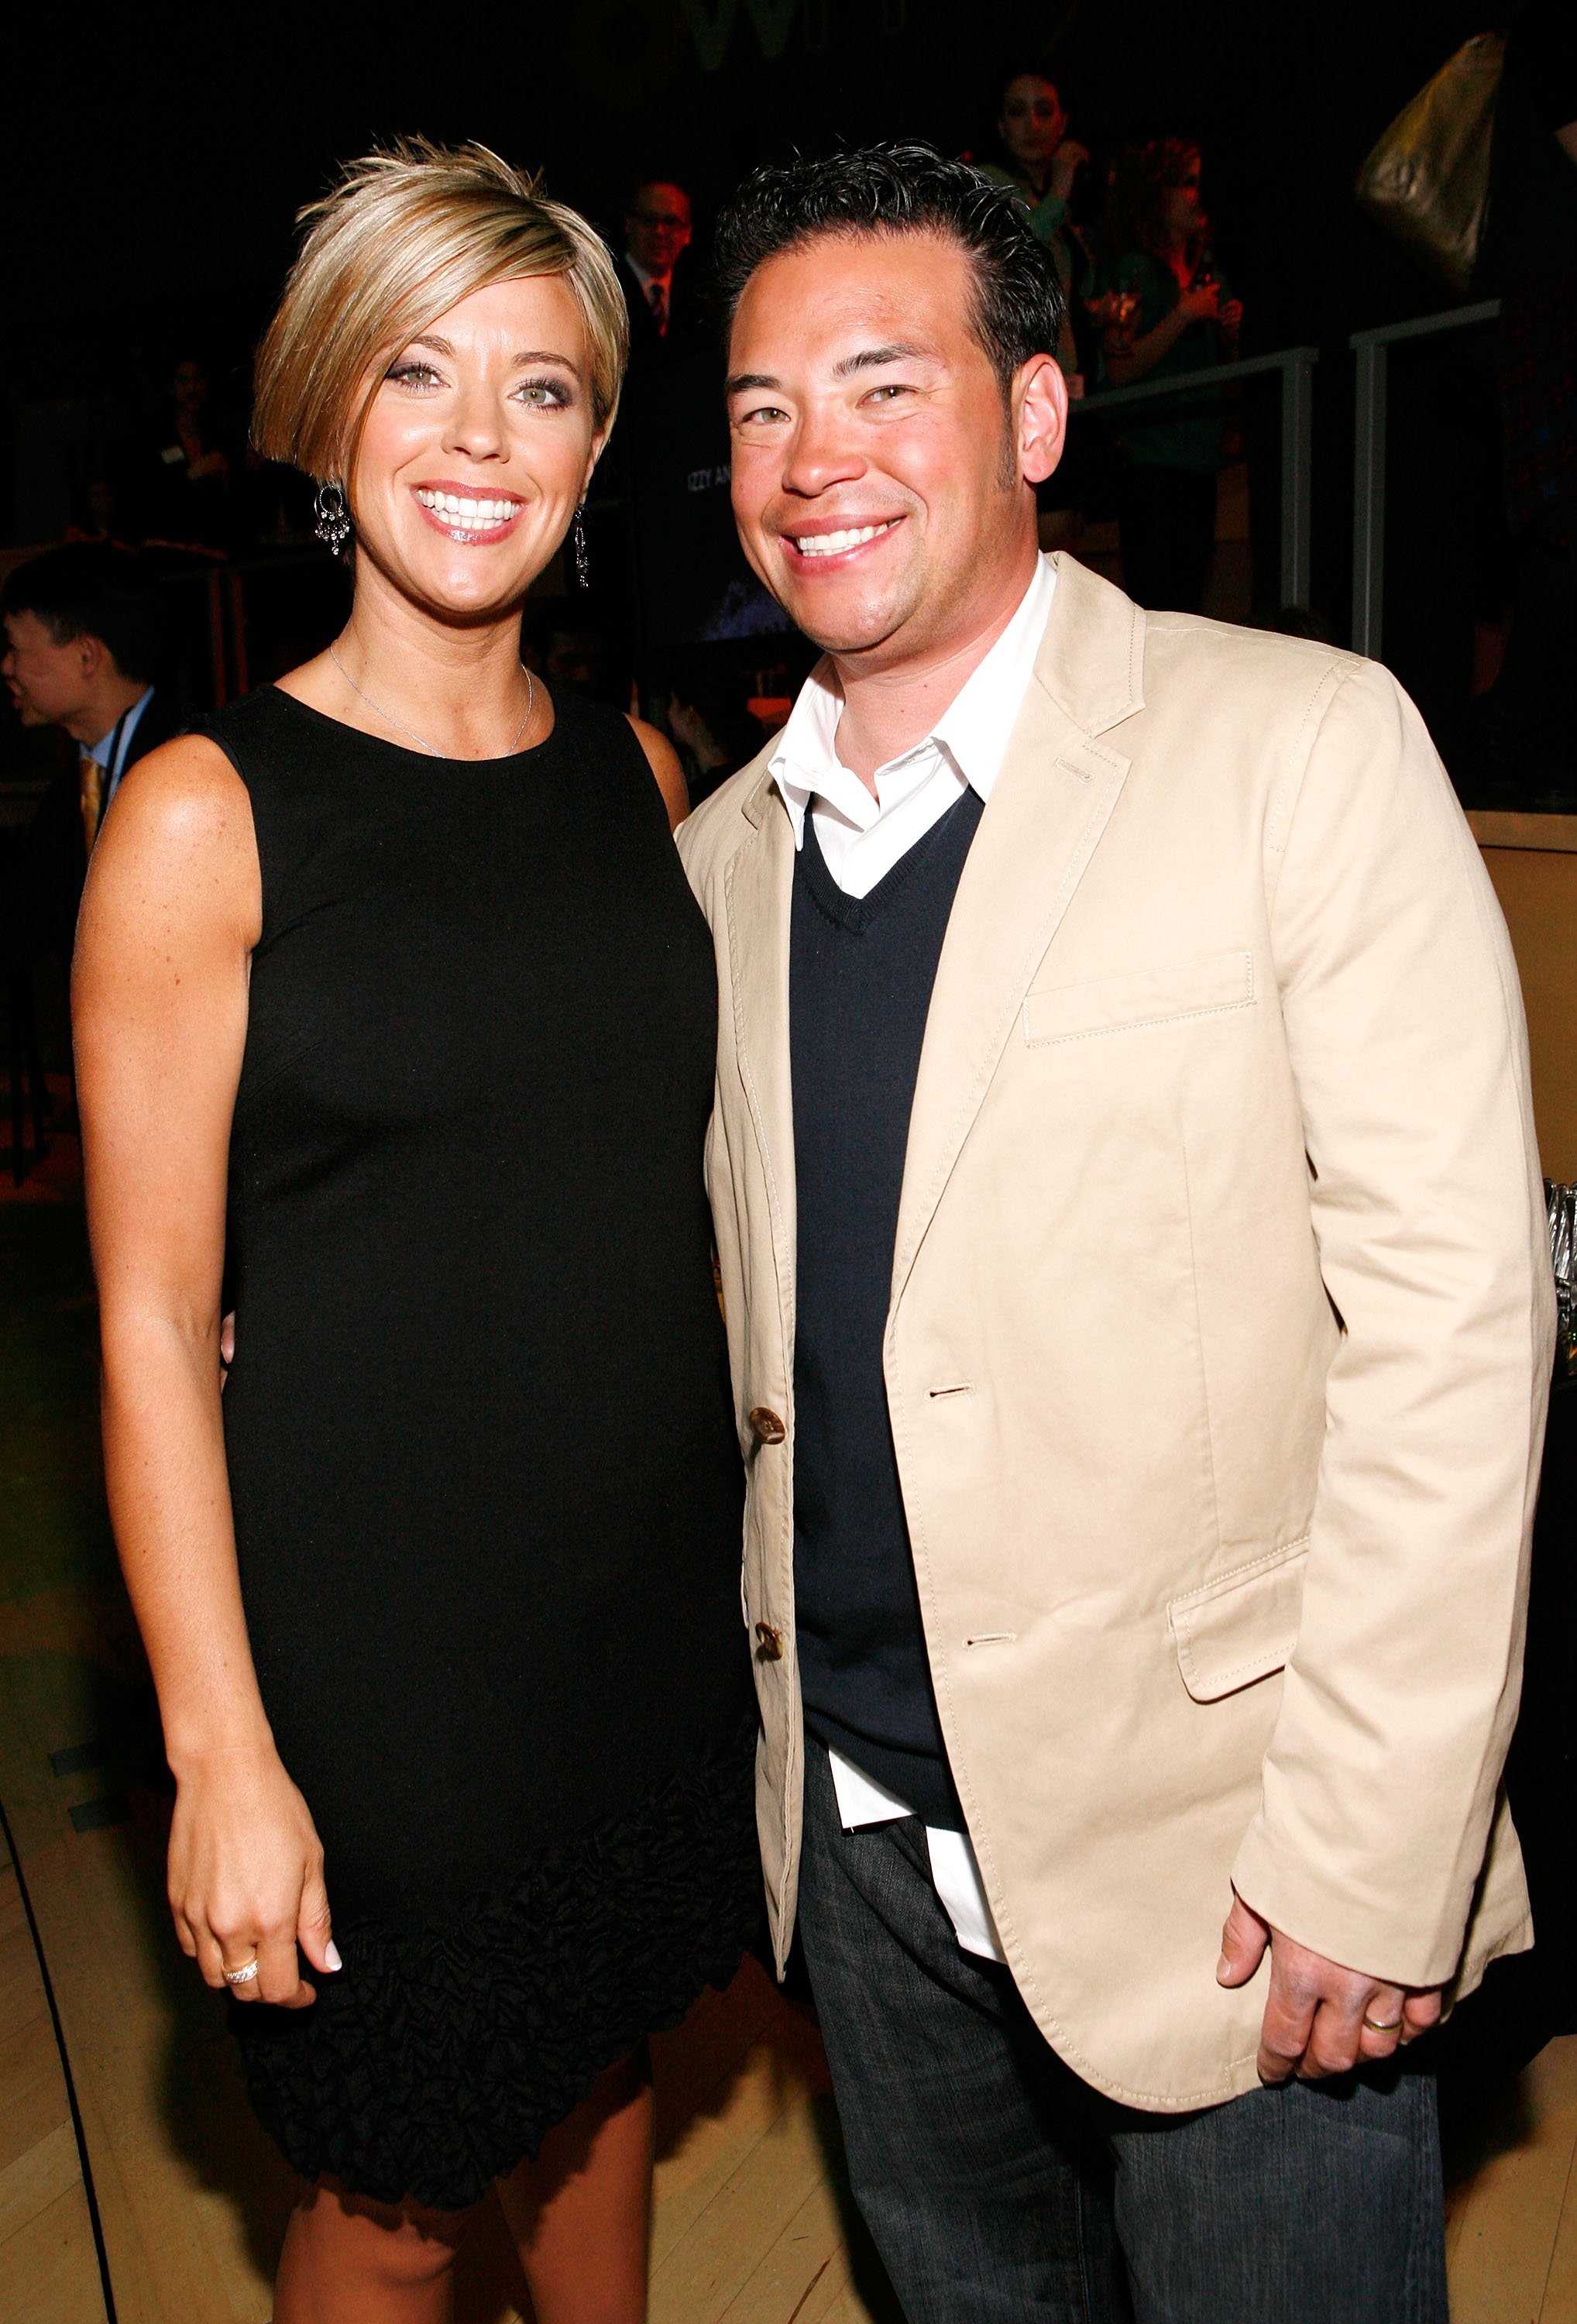 Jon and Kate Gosselin attend Discovery Upfront at Jazz at Lincoln Center in New York in 2009 |  Source: Getty Images 